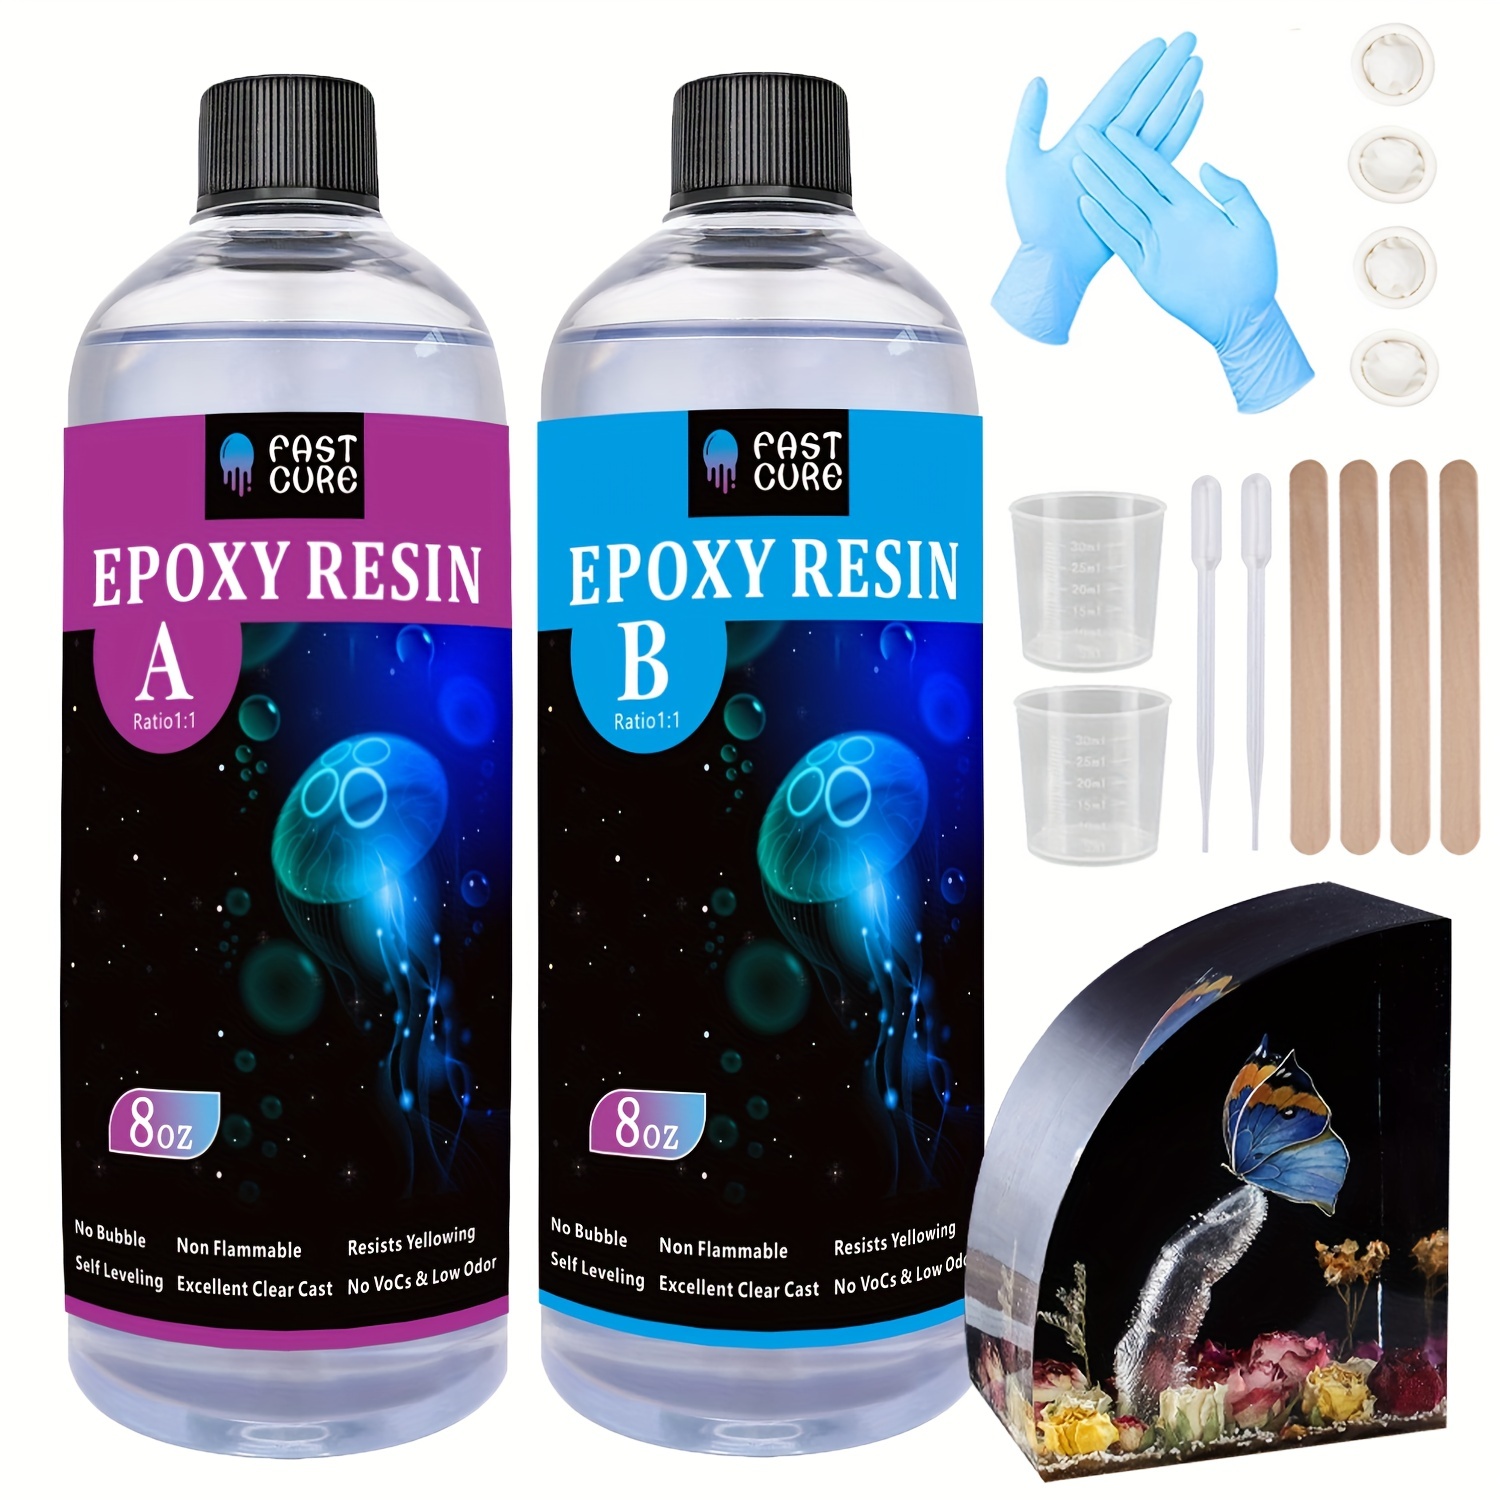 LETS RESIN Fast Cure Epoxy Resin Kit-4 Hours Demold, 20OZ Quick Curing &  Bubble Free Epoxy Resin,Crystal Clear Epoxy Resin for Craft,Art, Resin